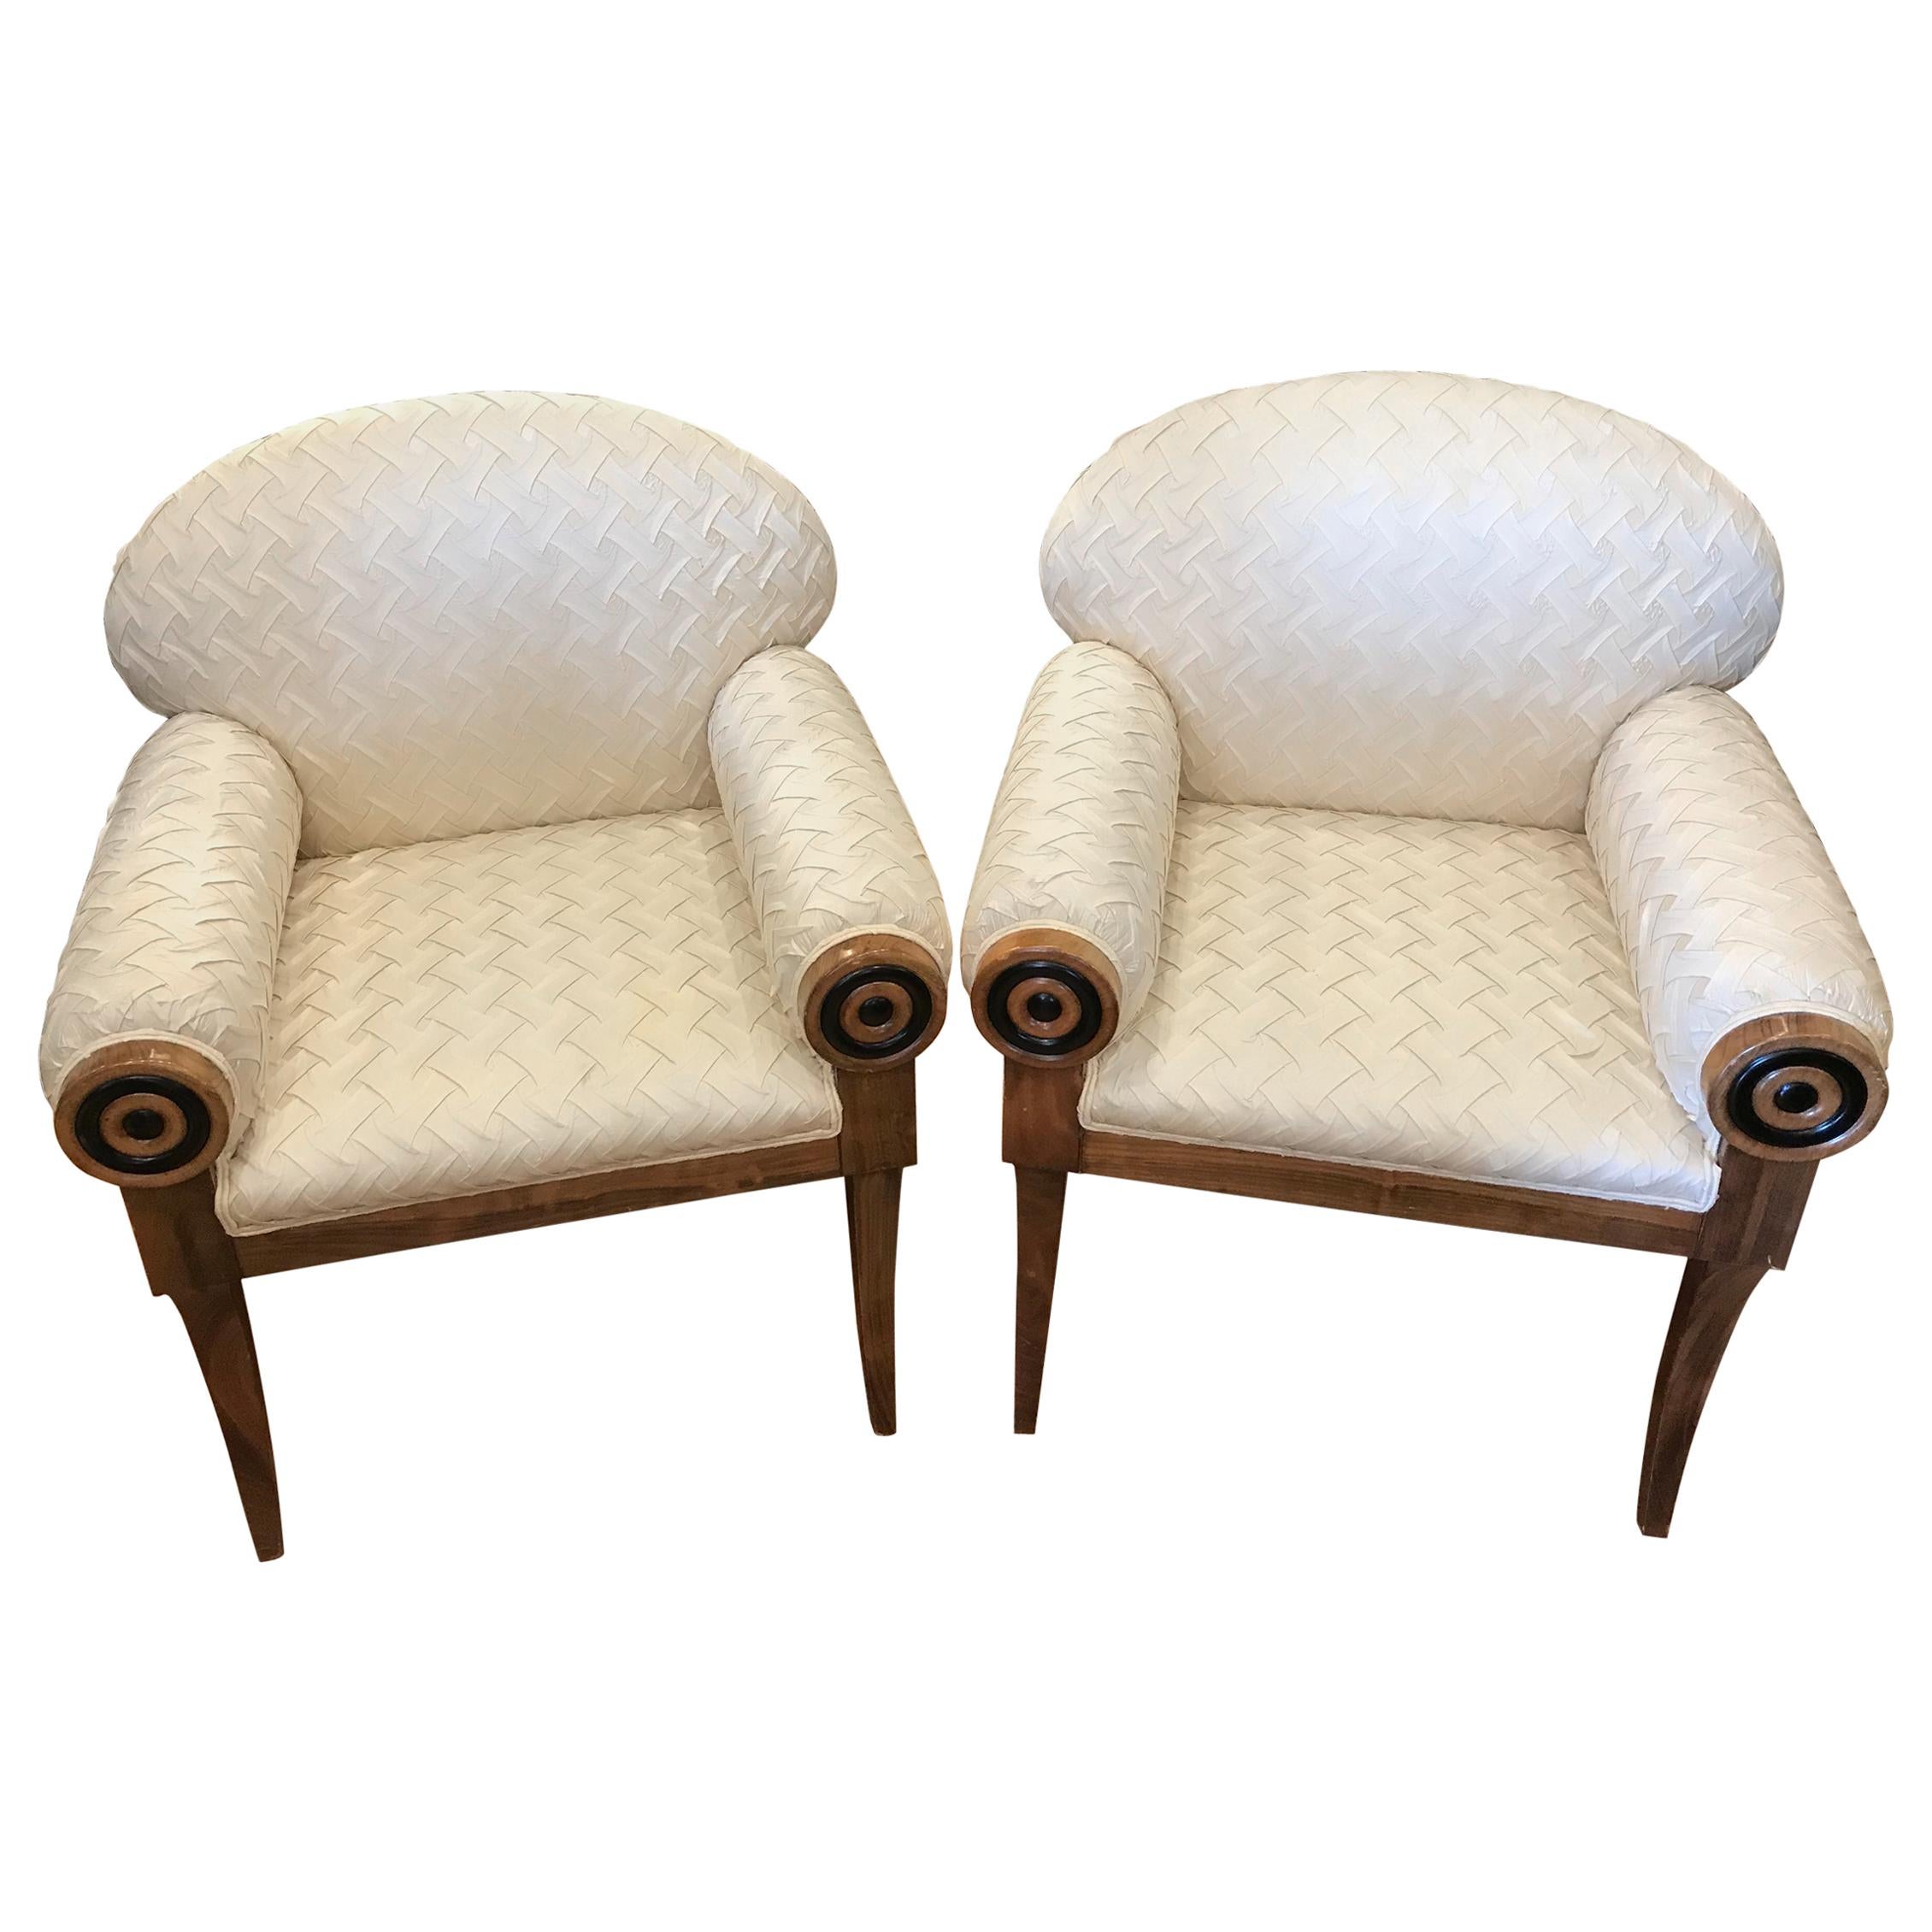 Pair of Art Deco Inspired Midcentury Club Chairs